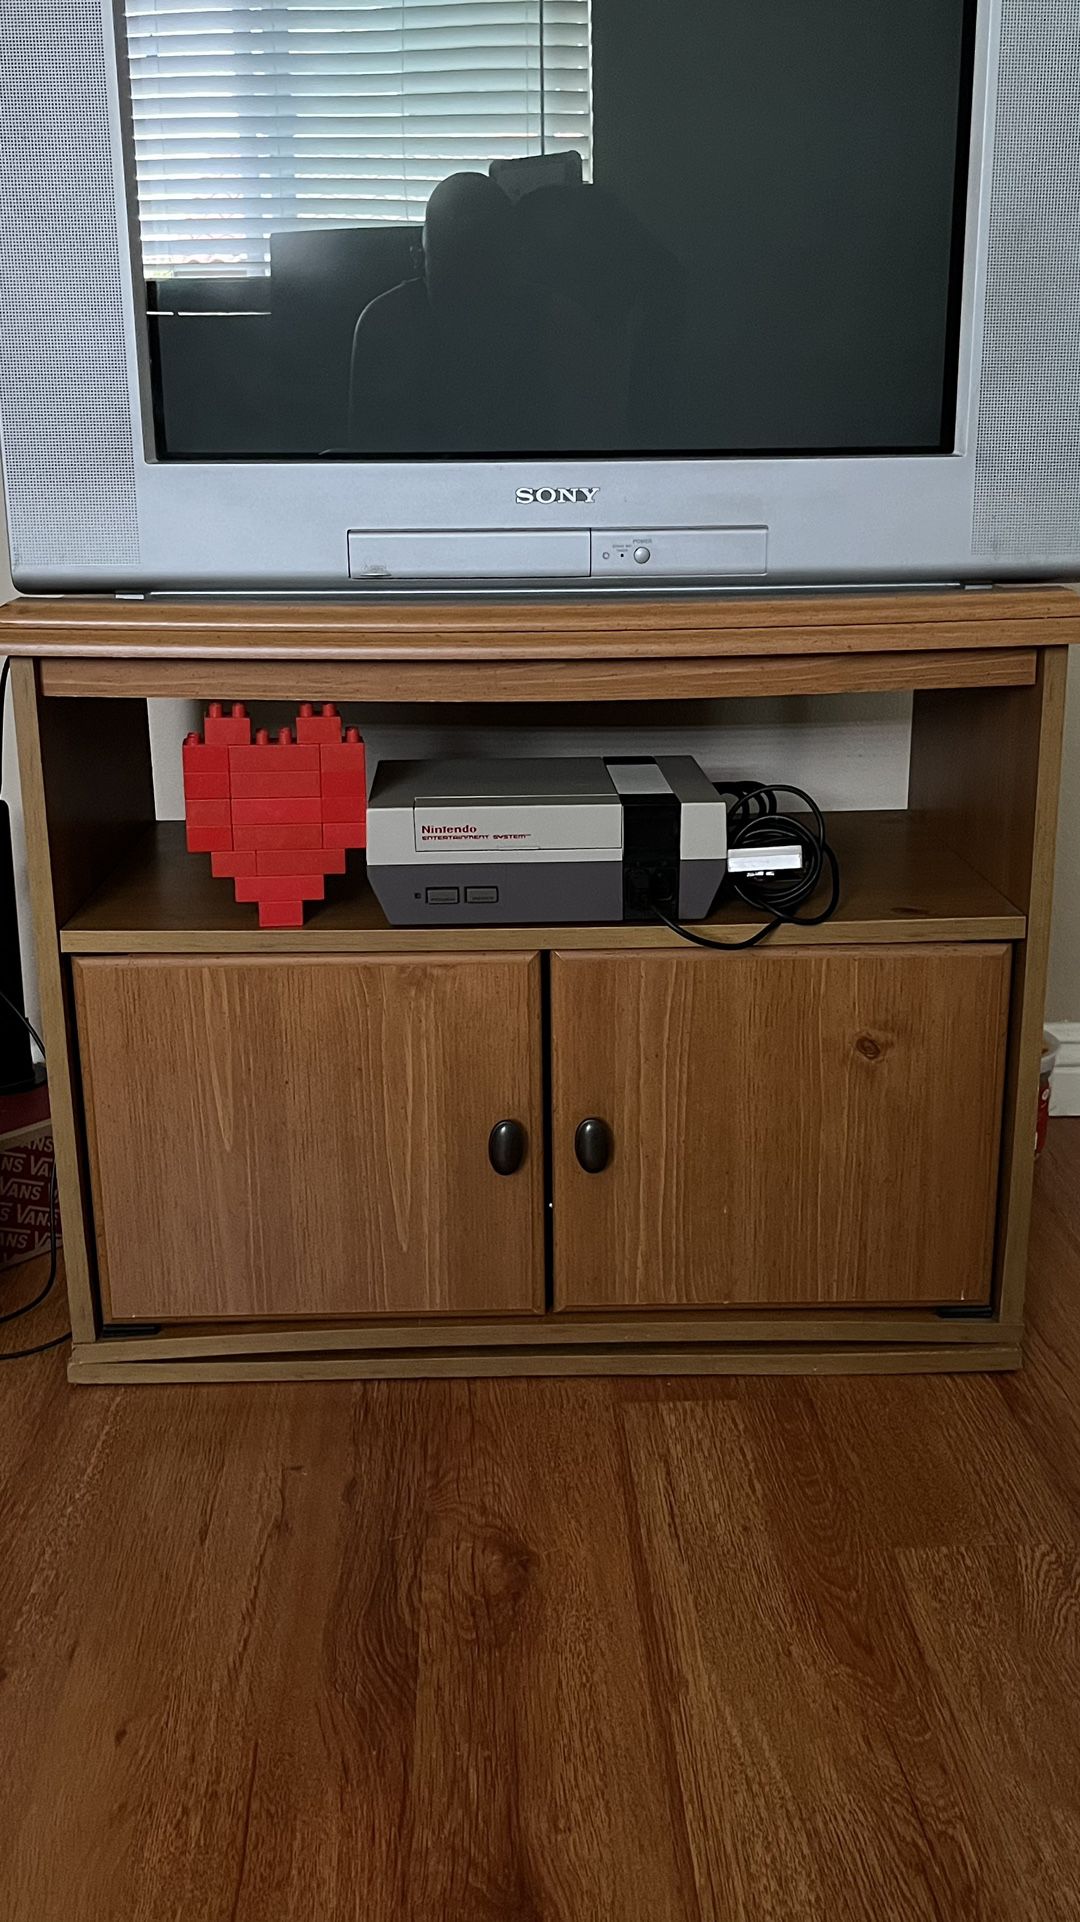 $10 TV stand